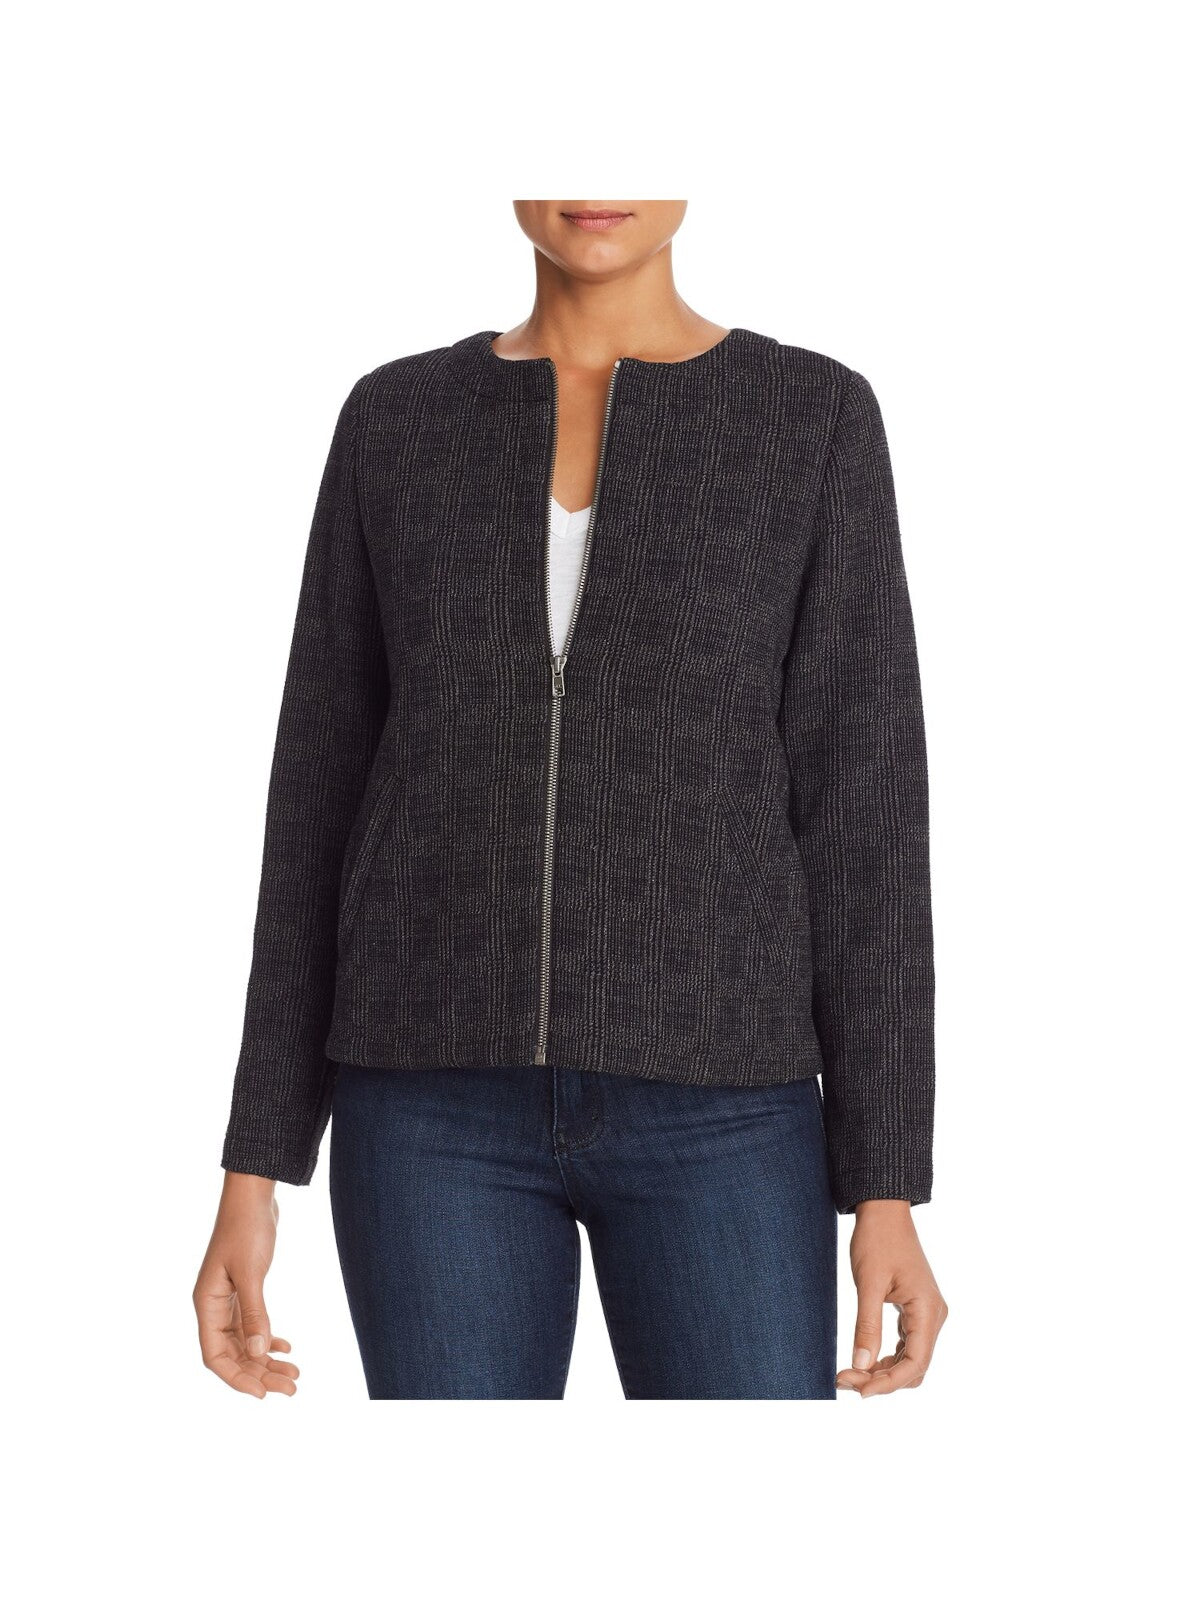 EILEEN FISHER Womens Gray Pocketed Textured Jacquard Zip Up Jacket L